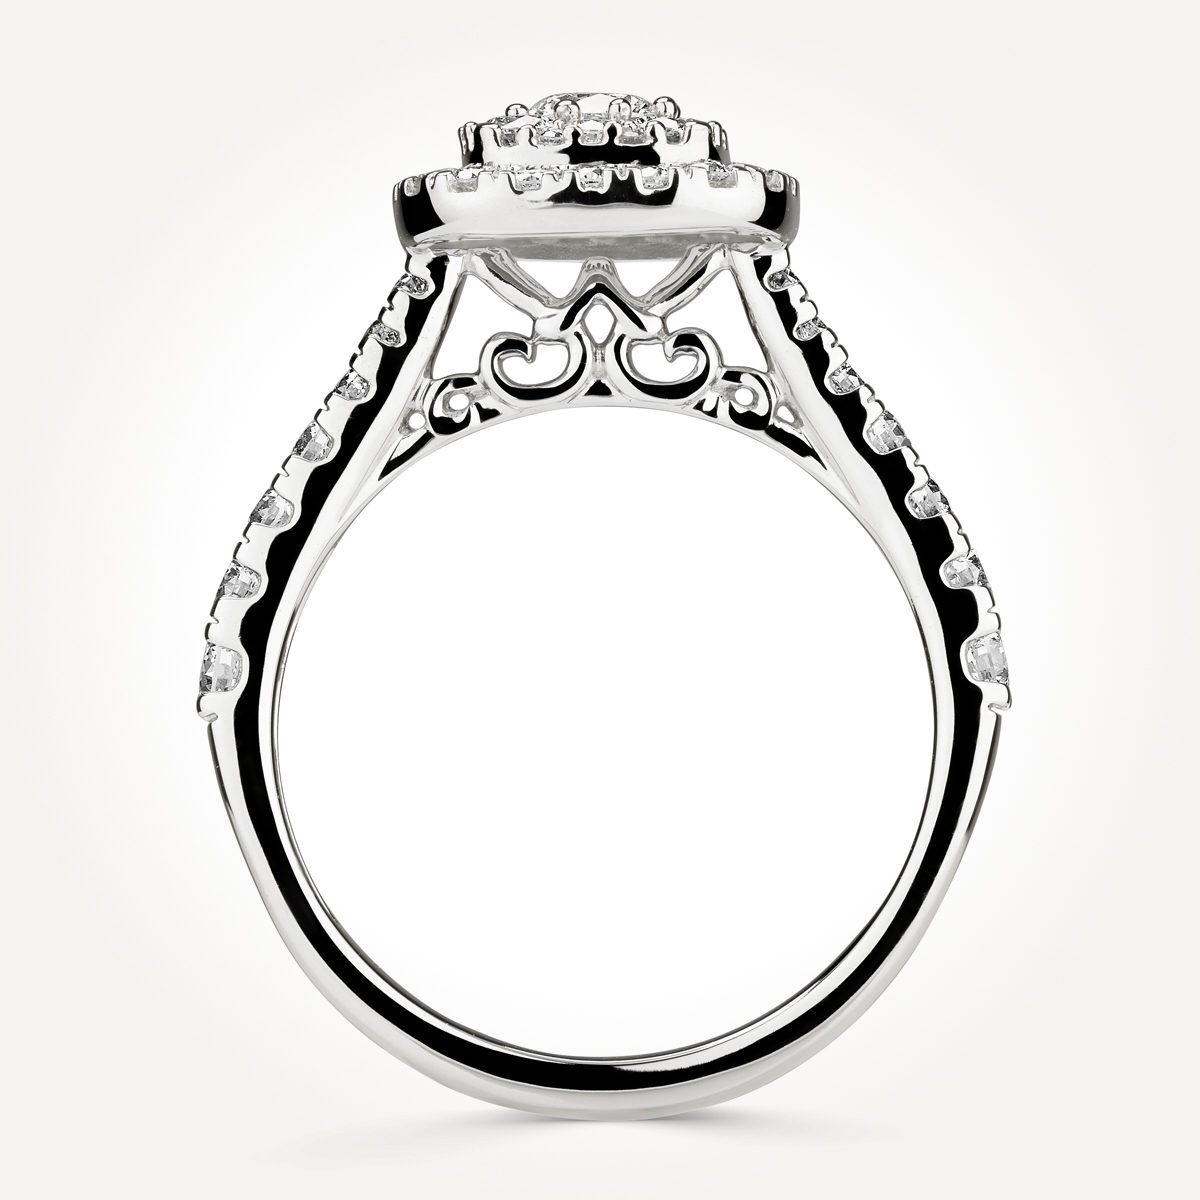 14KT White Gold Cushion Cluster Halo Ring